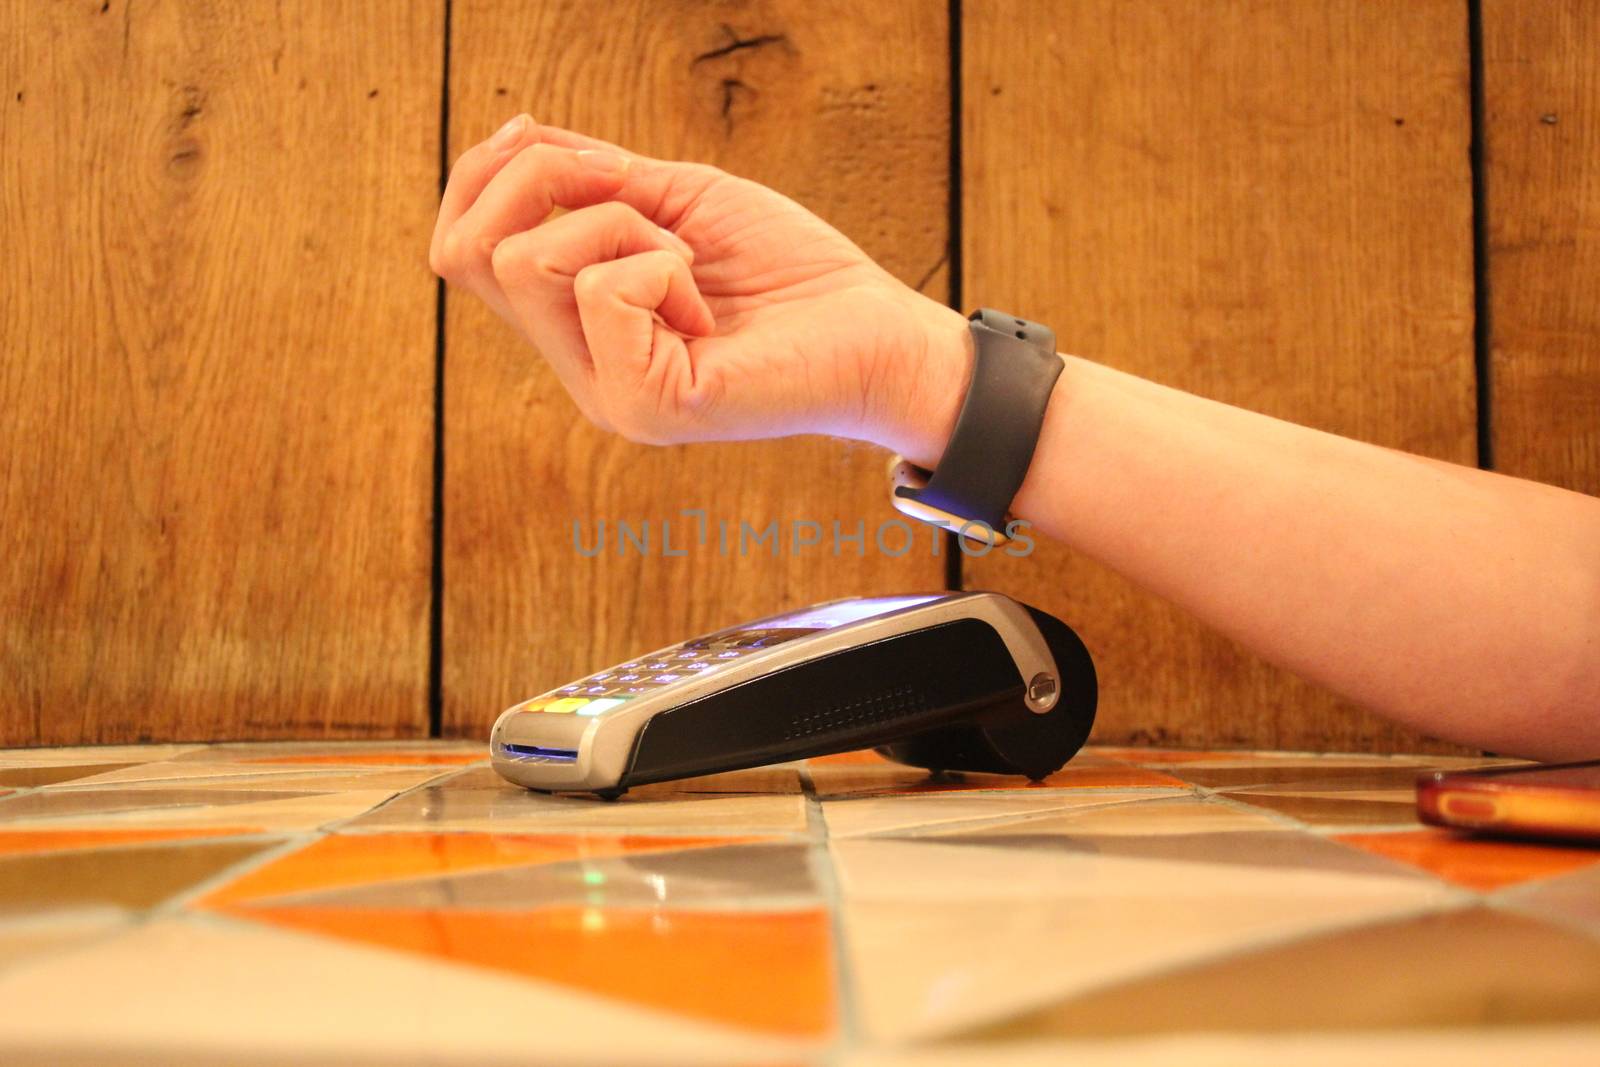 contactless payment apple watch pdq with hand holding credit card to pay by cheekylorns